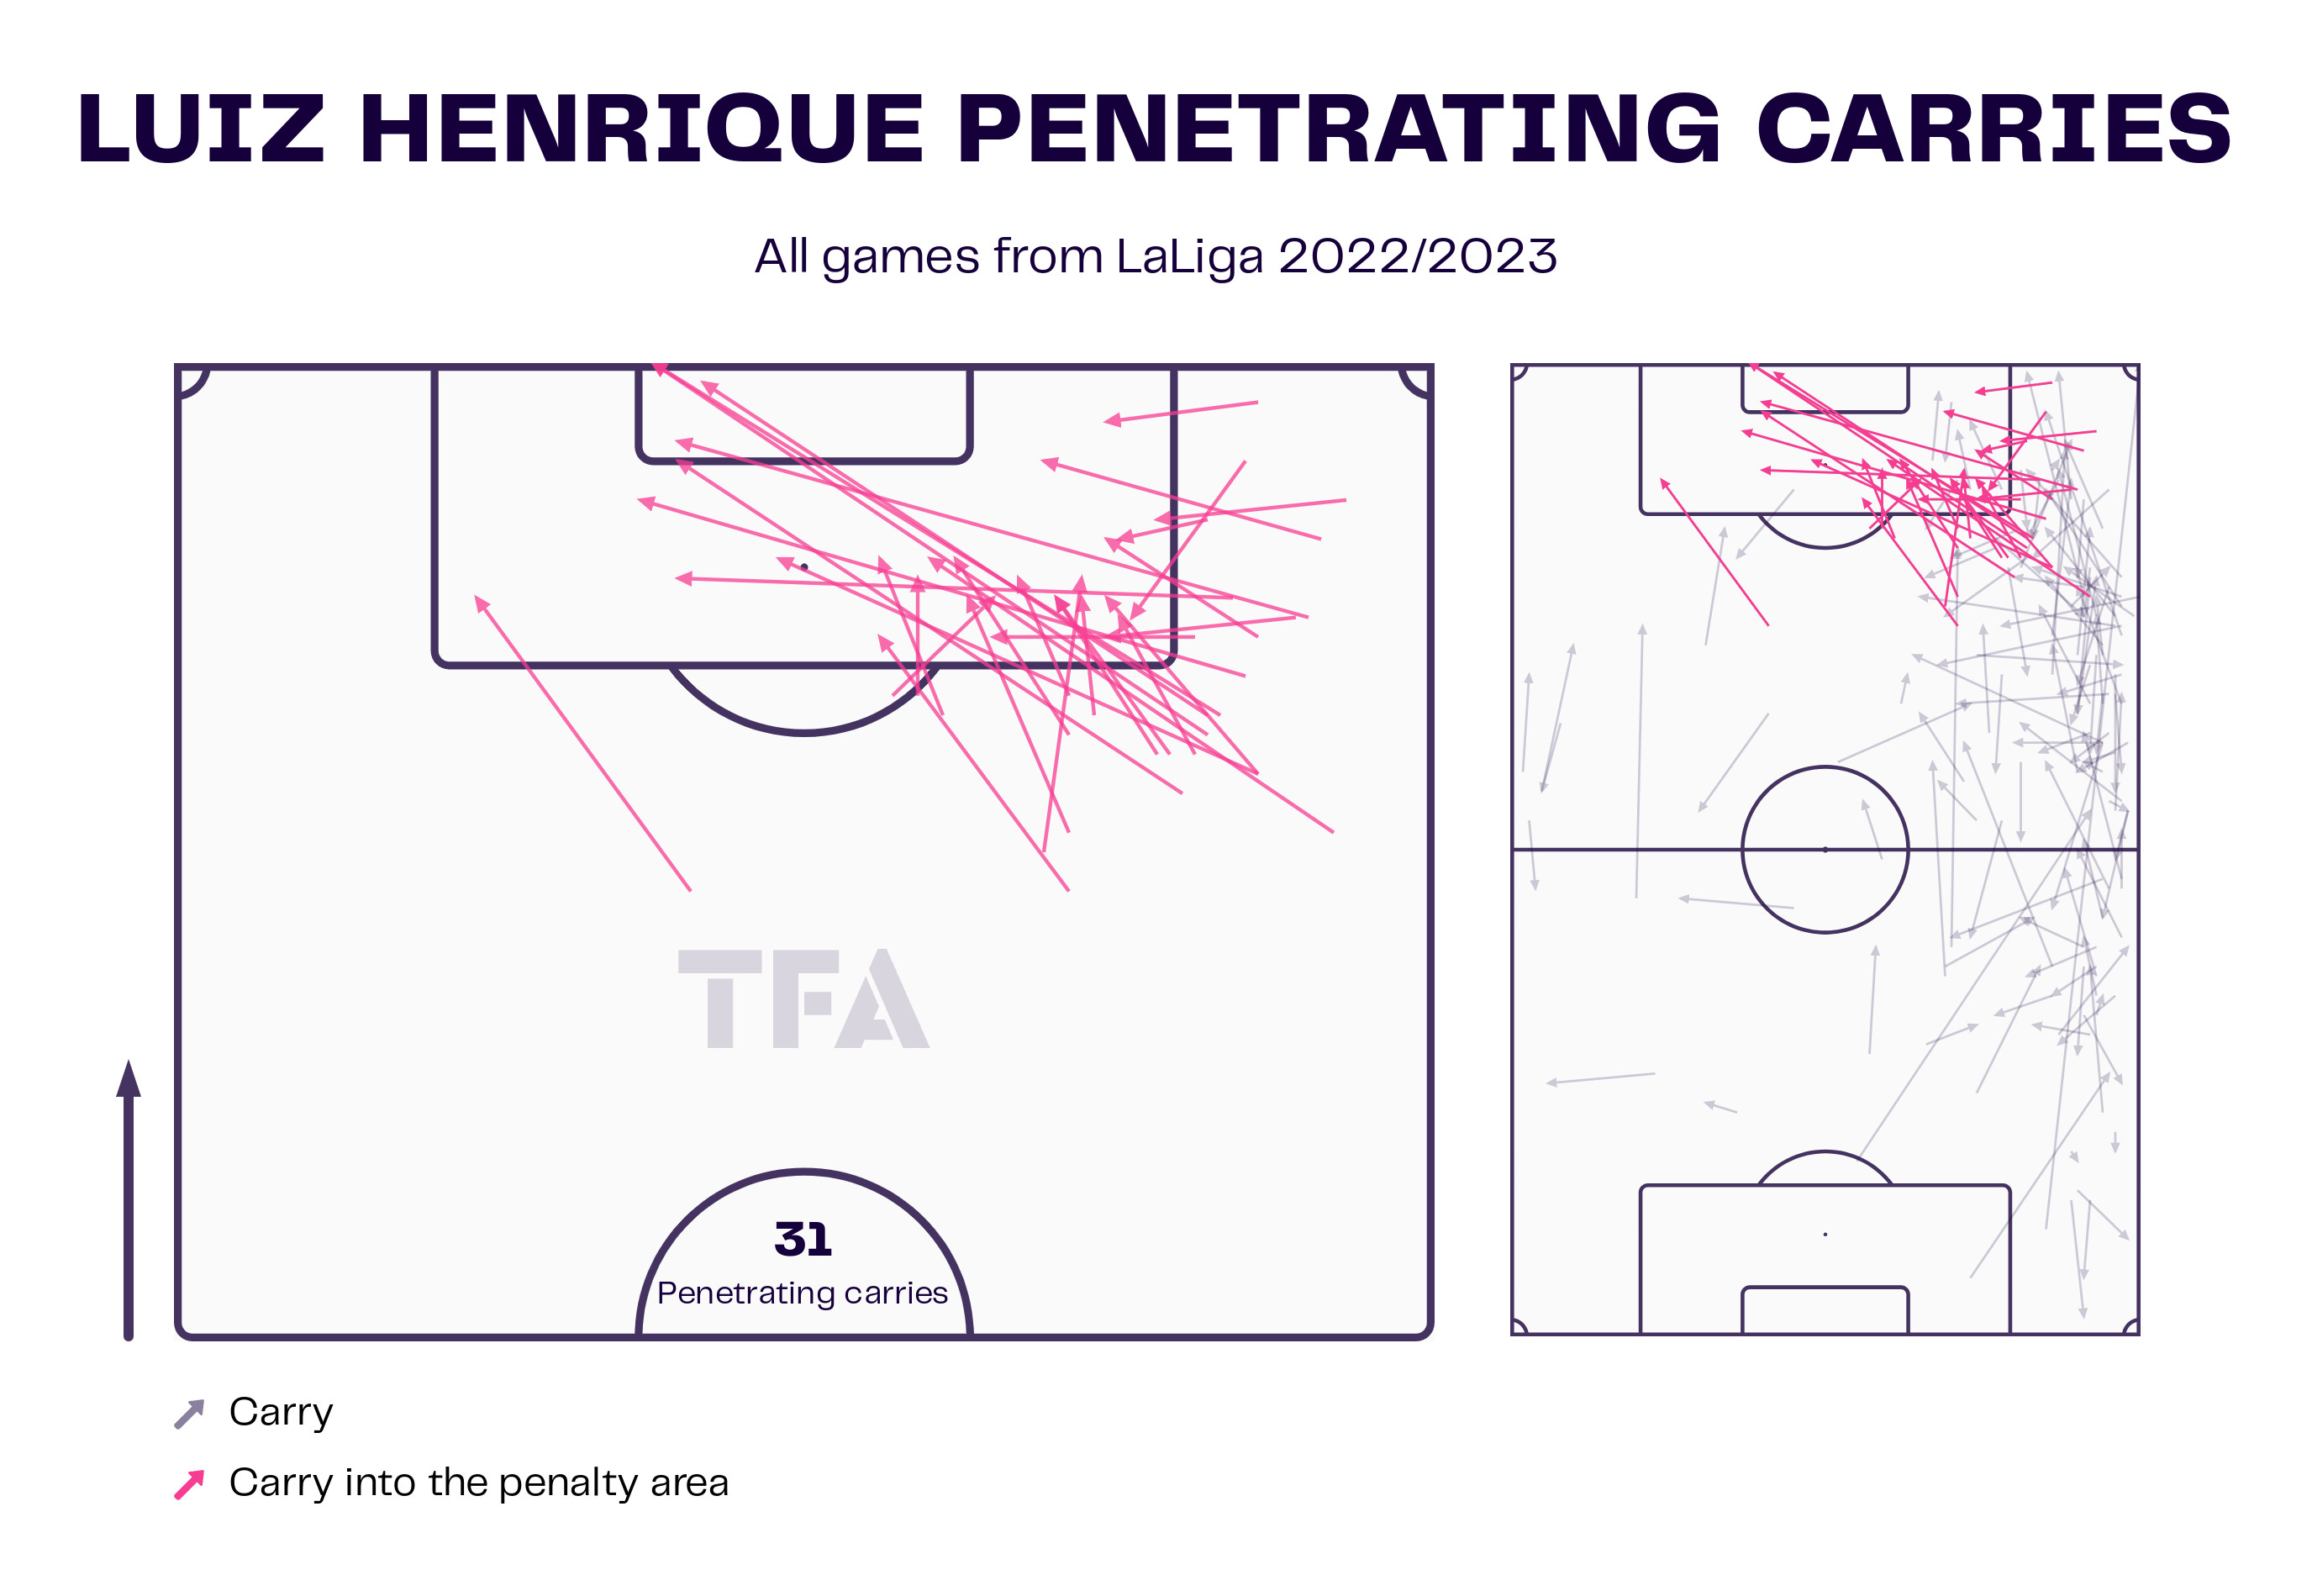 Luis Henrique - Real Betis: La Liga 2022/23 Data, Stats, Analysis and Scout Report